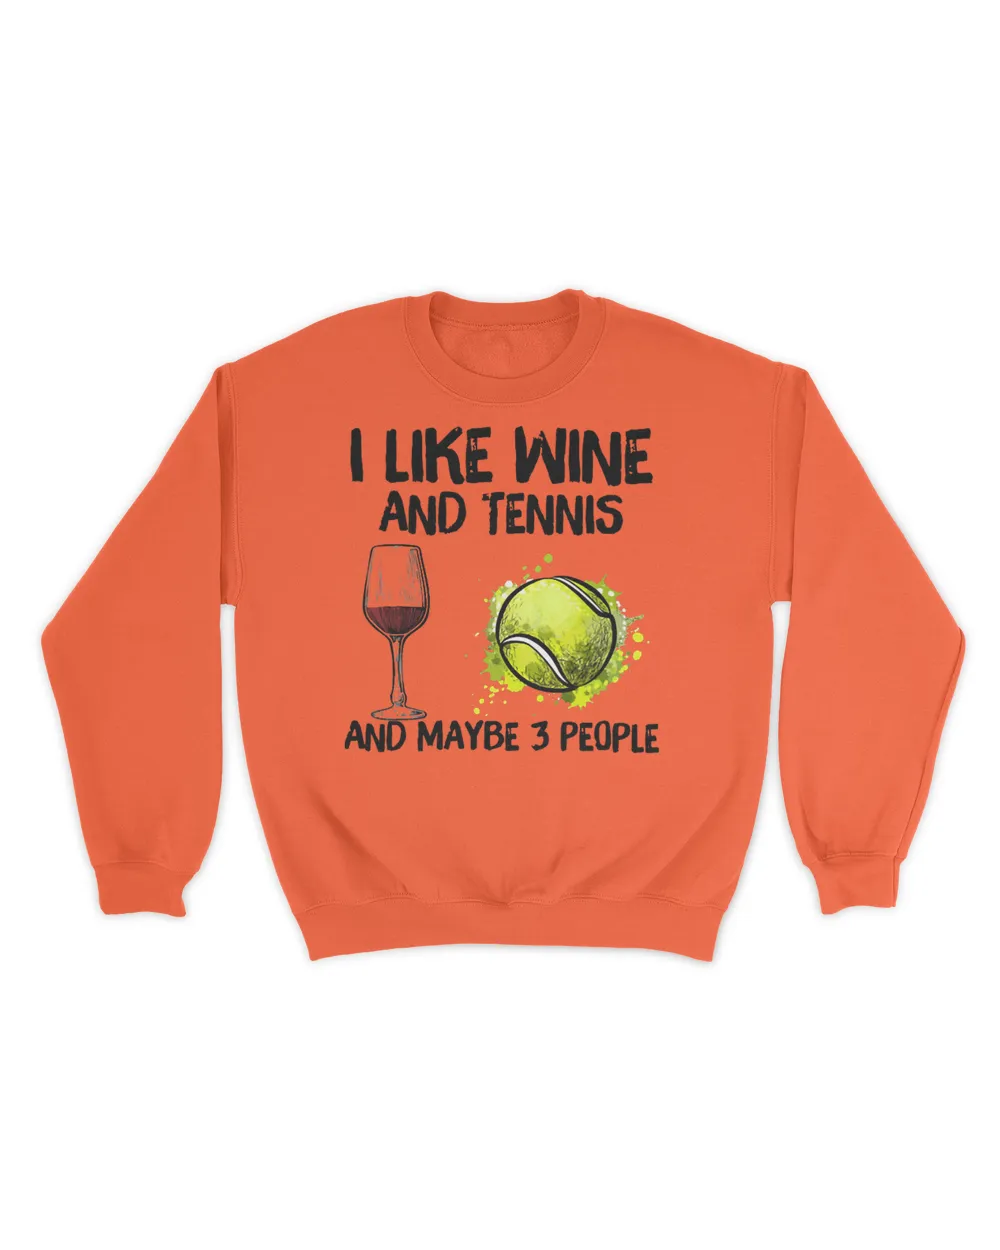 I Like Wine And Tennis and Maybe 3 People T-Shirt